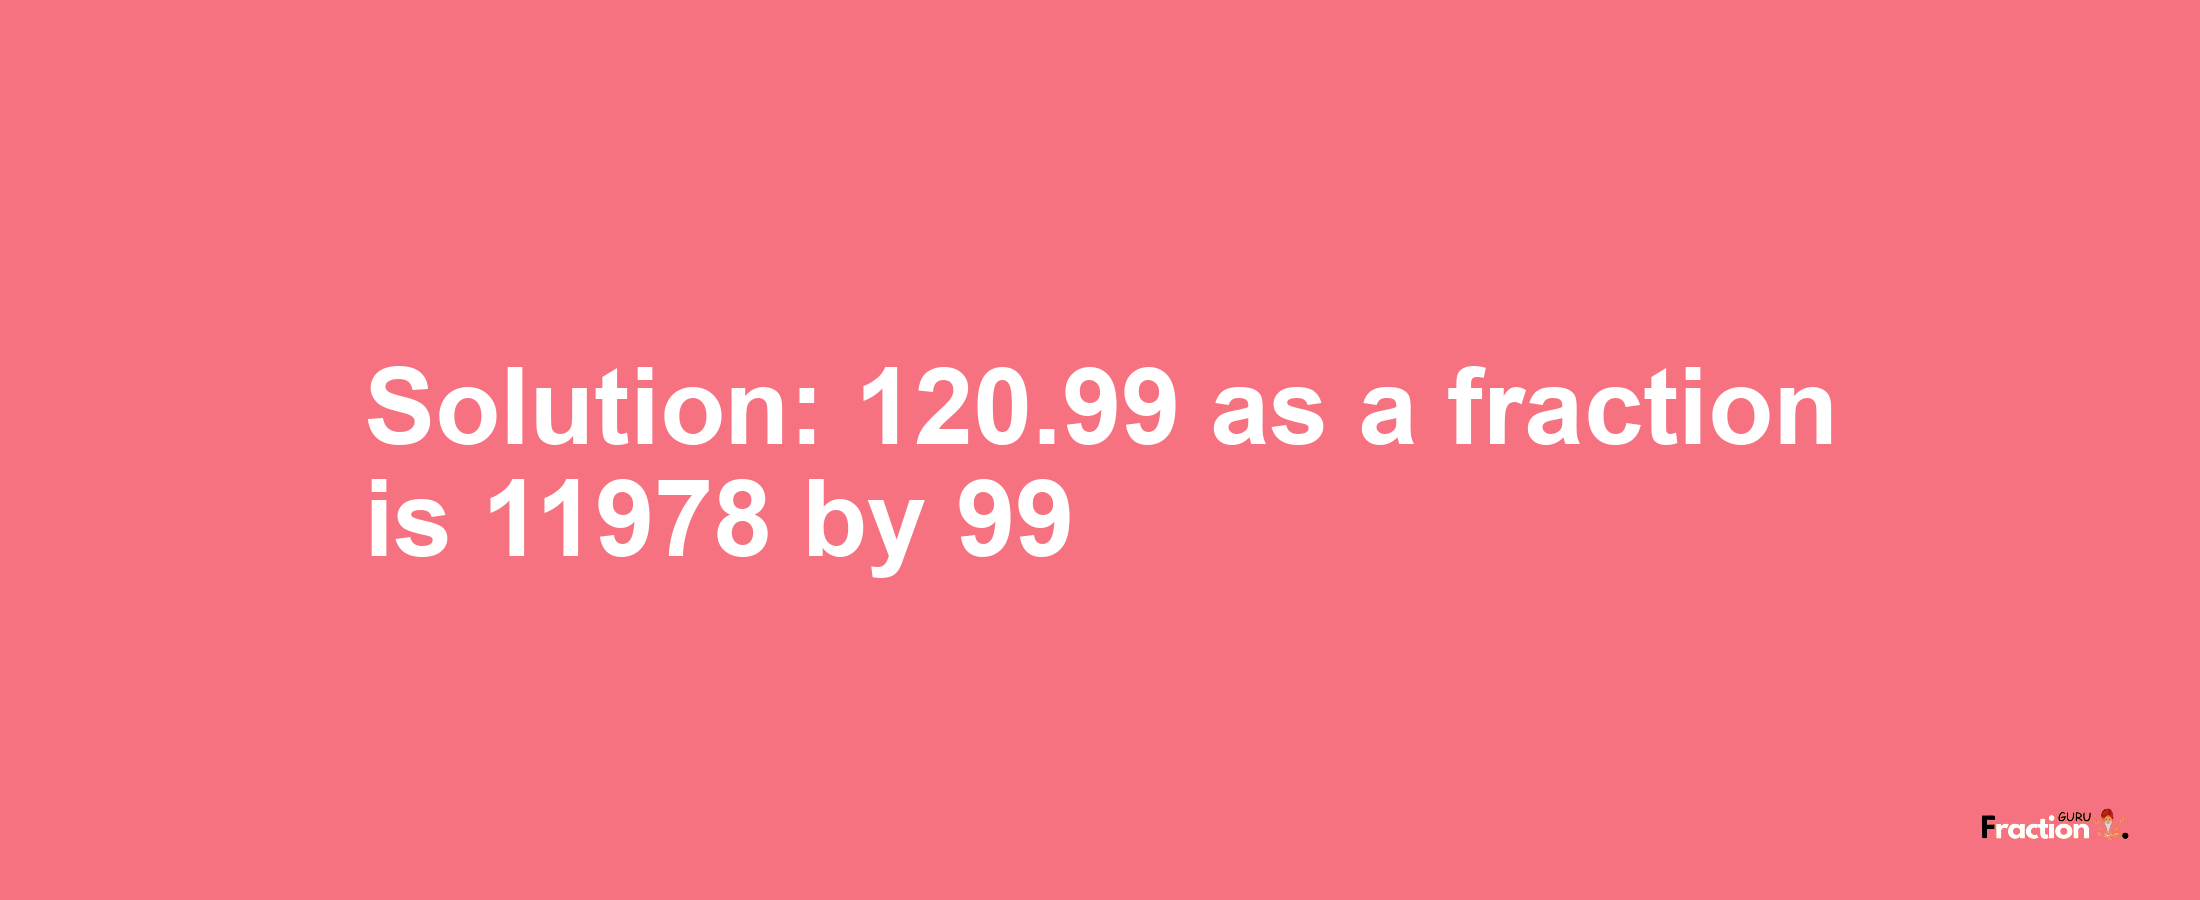 Solution:120.99 as a fraction is 11978/99